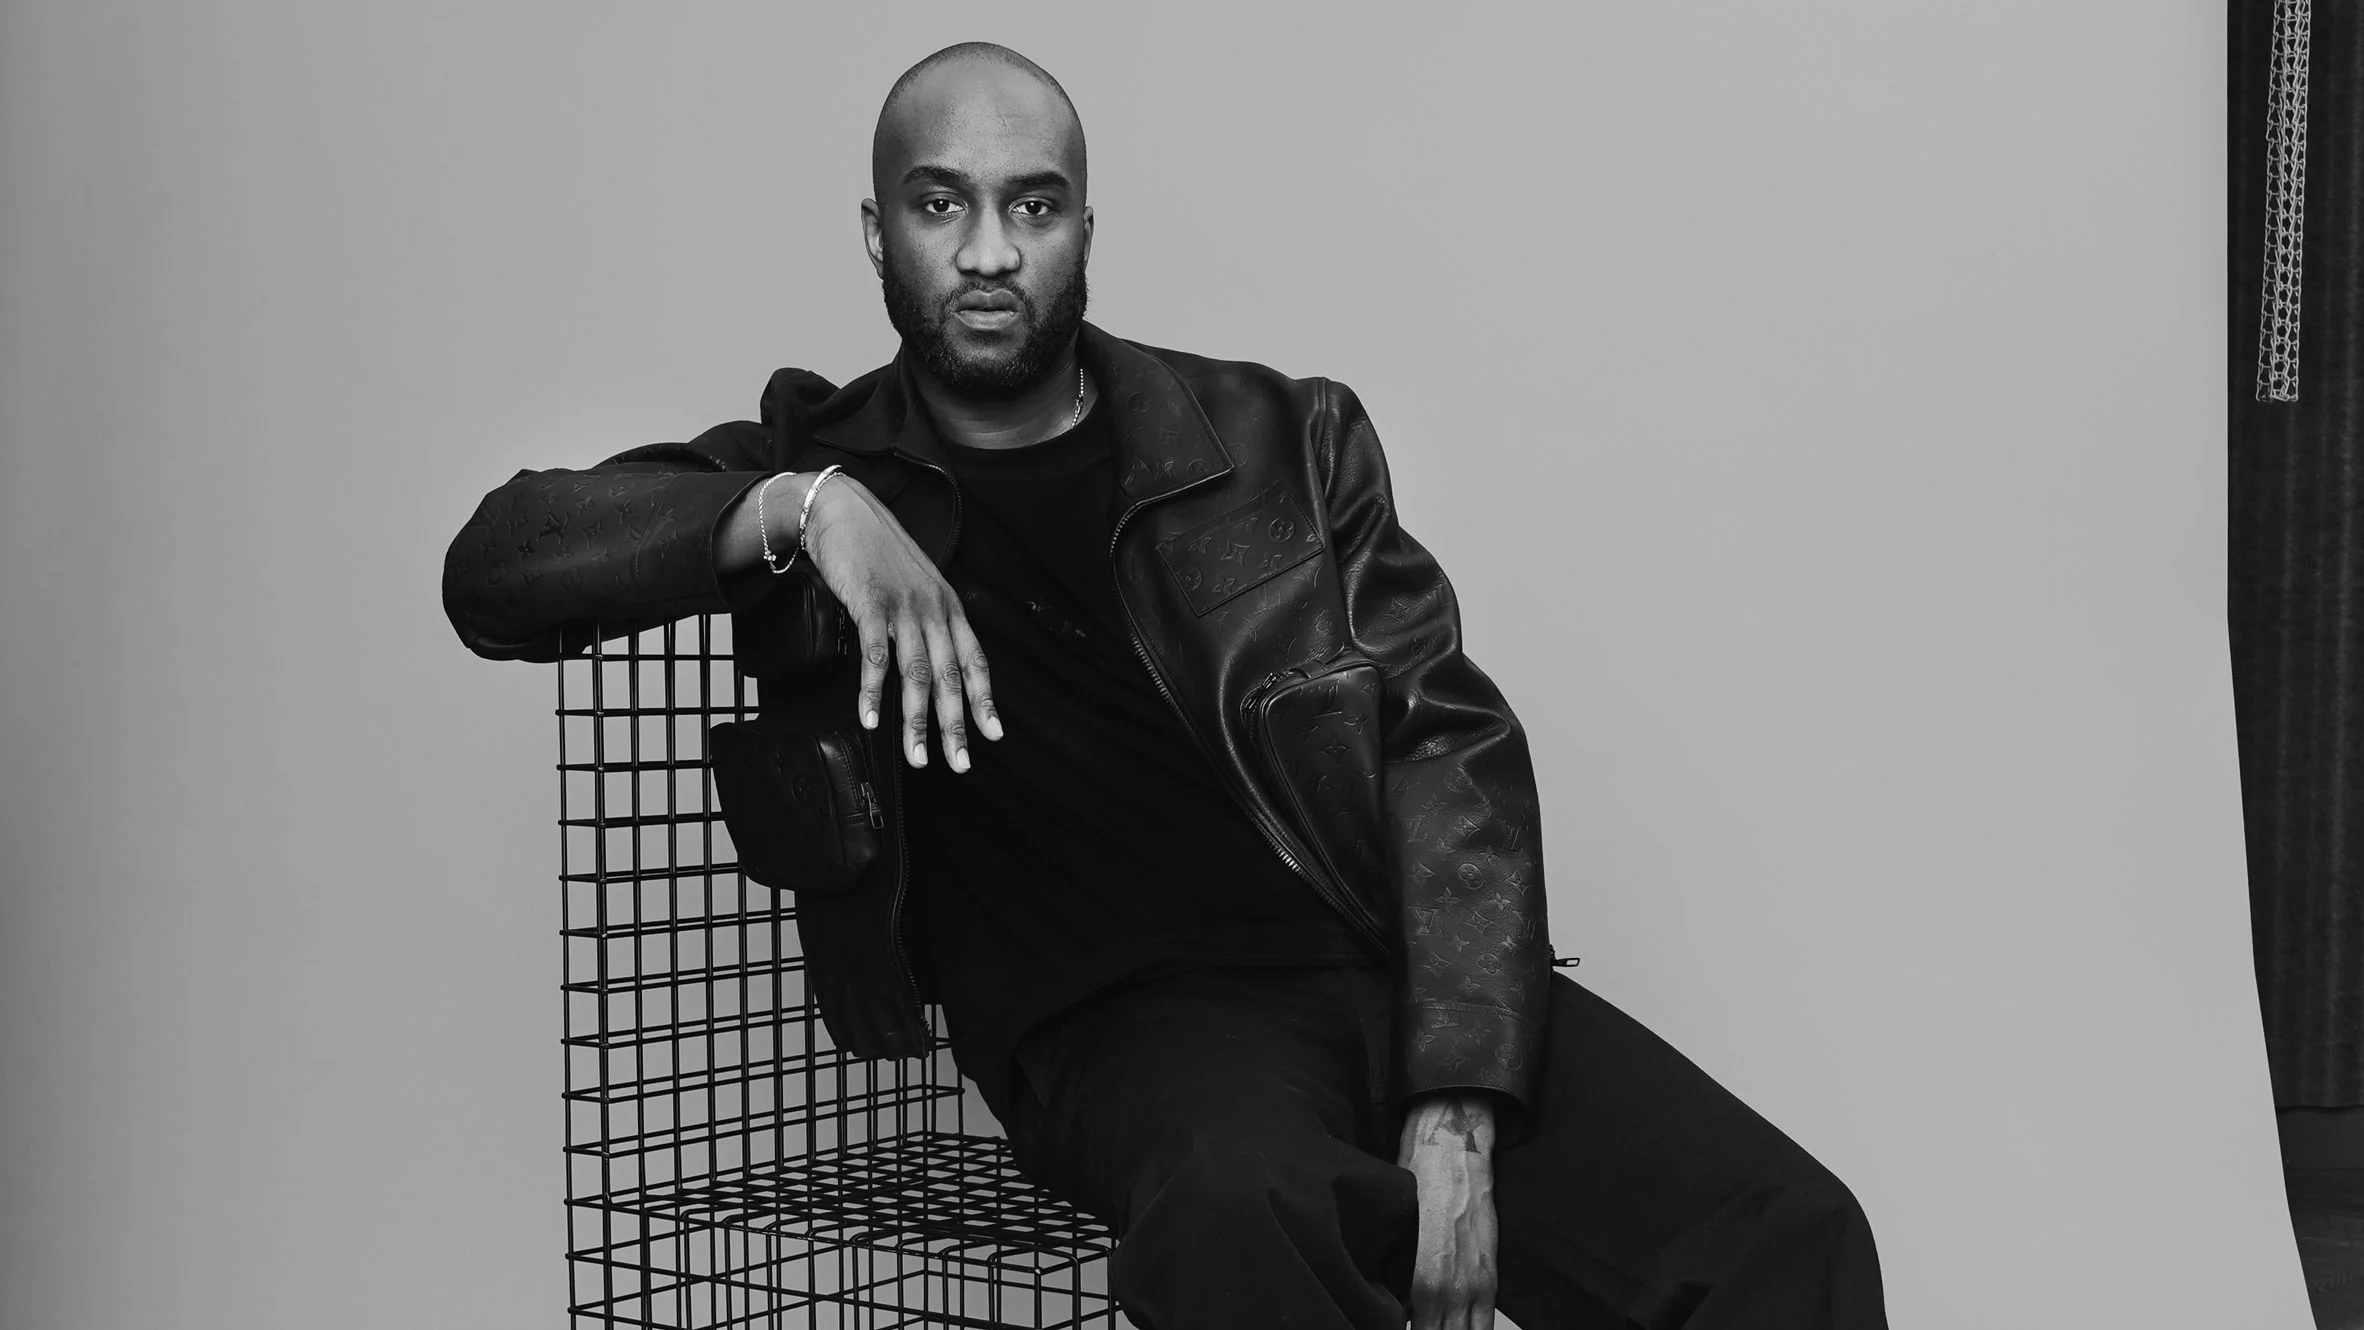 Remembering Off-White founder and influential fashion designer